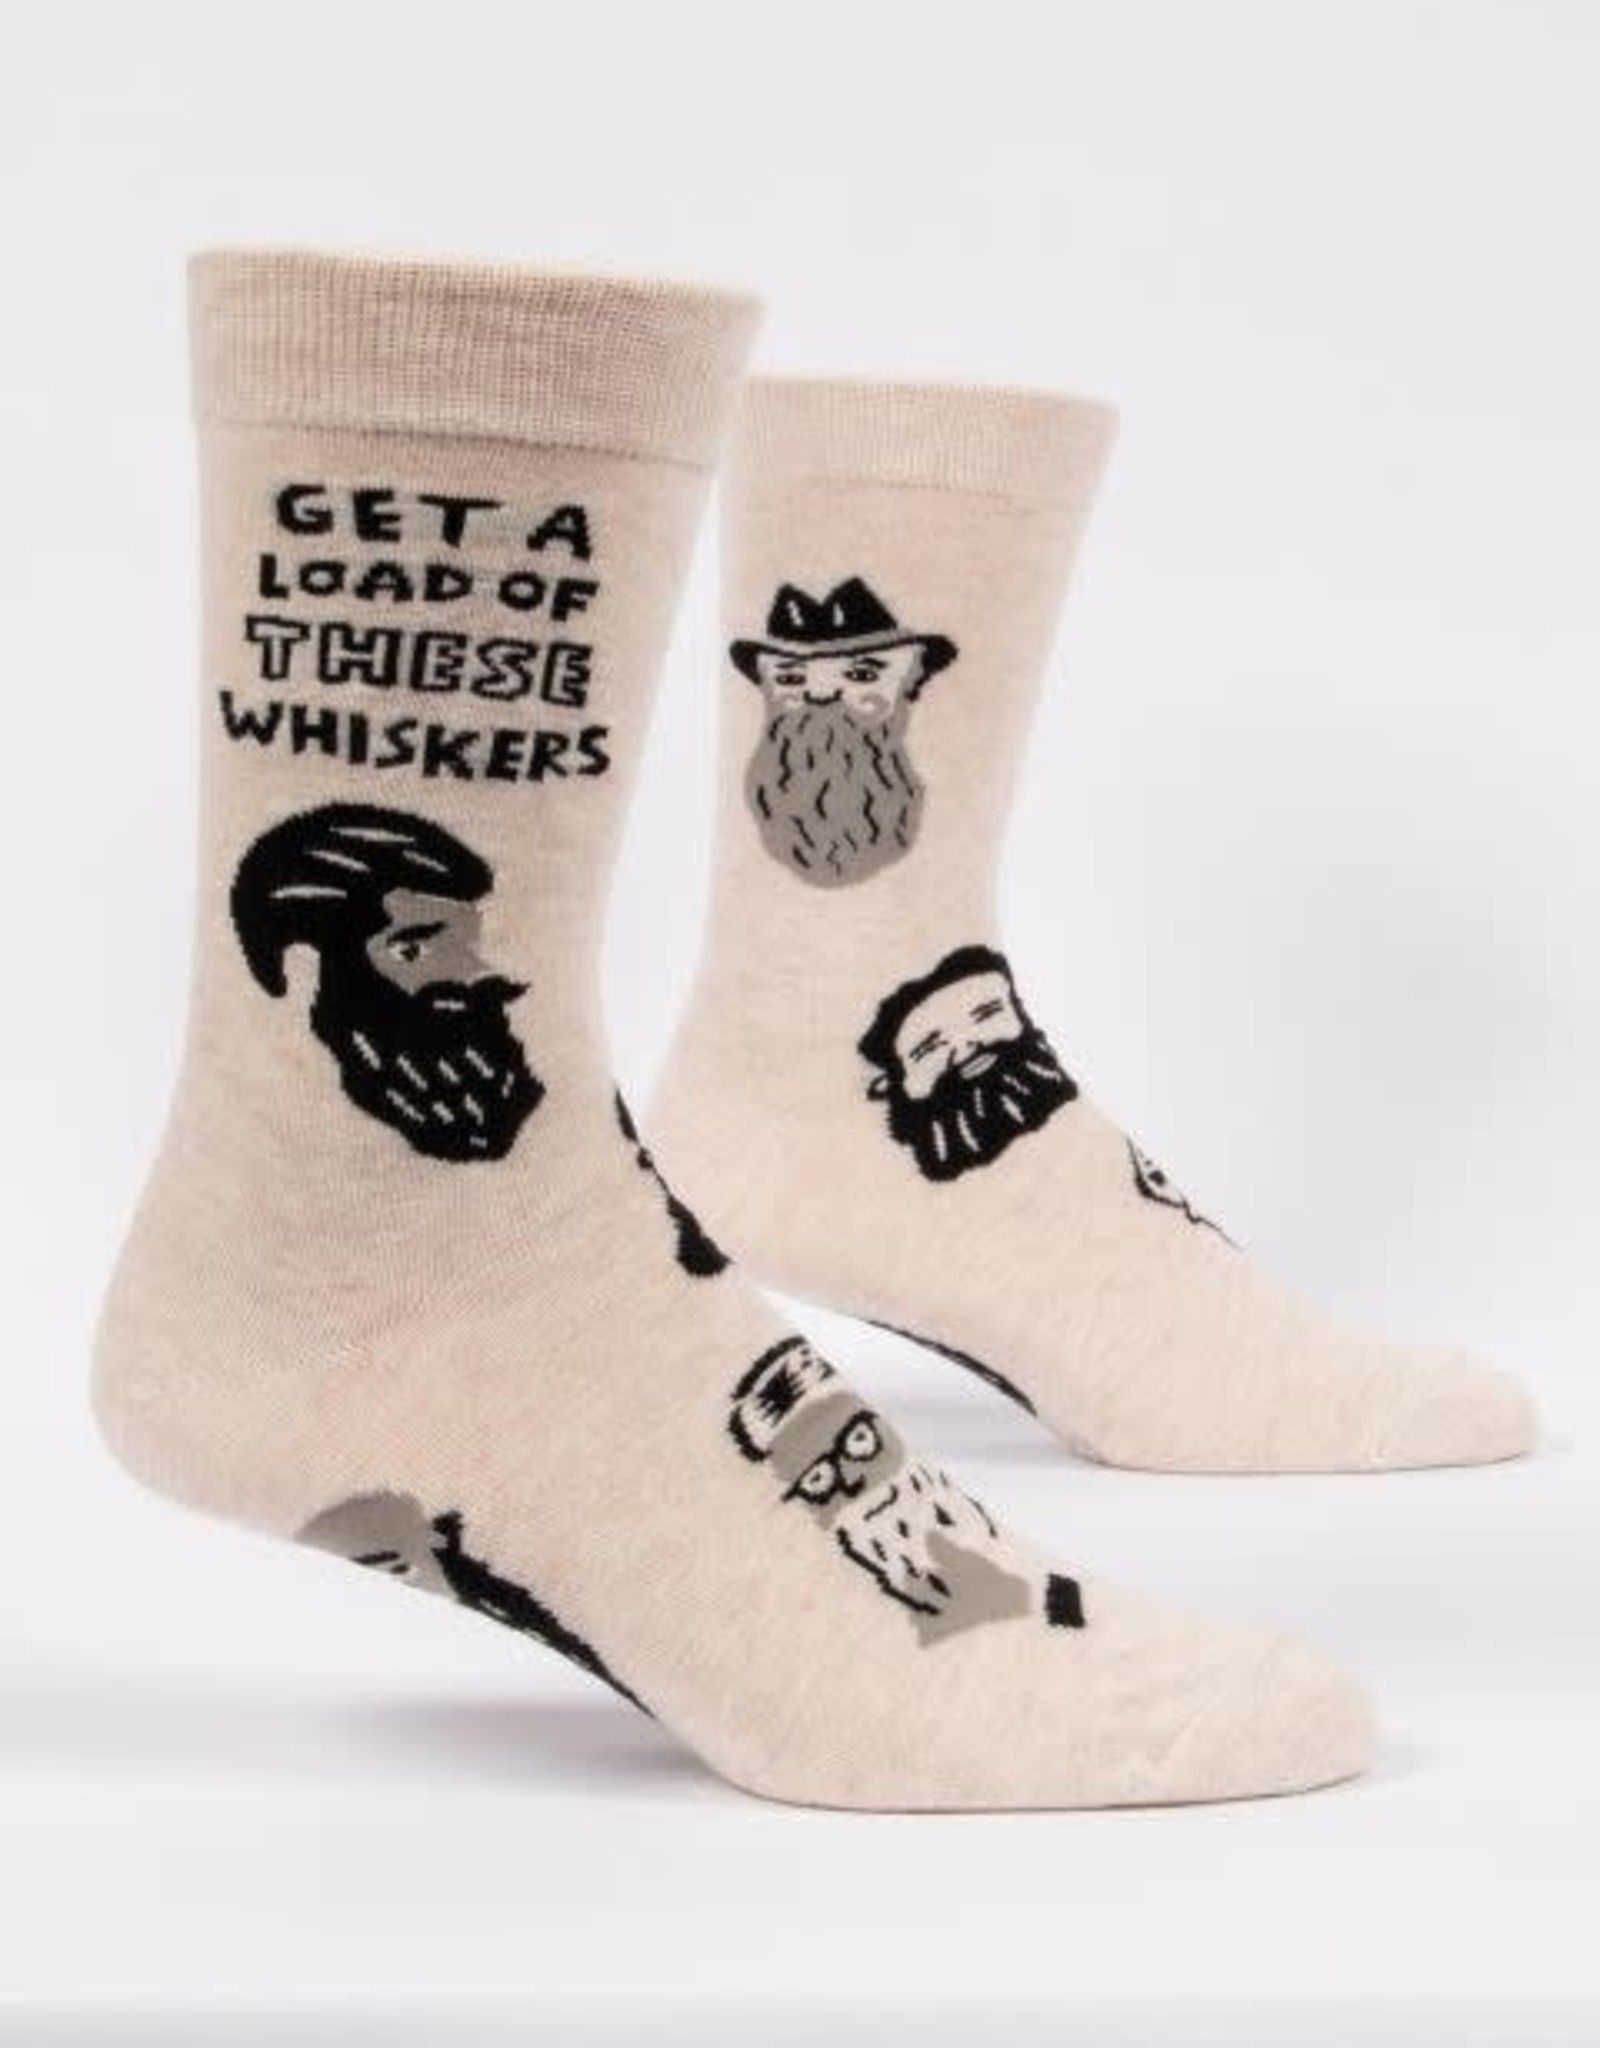 Get a Load of these Whiskers Men's Socks